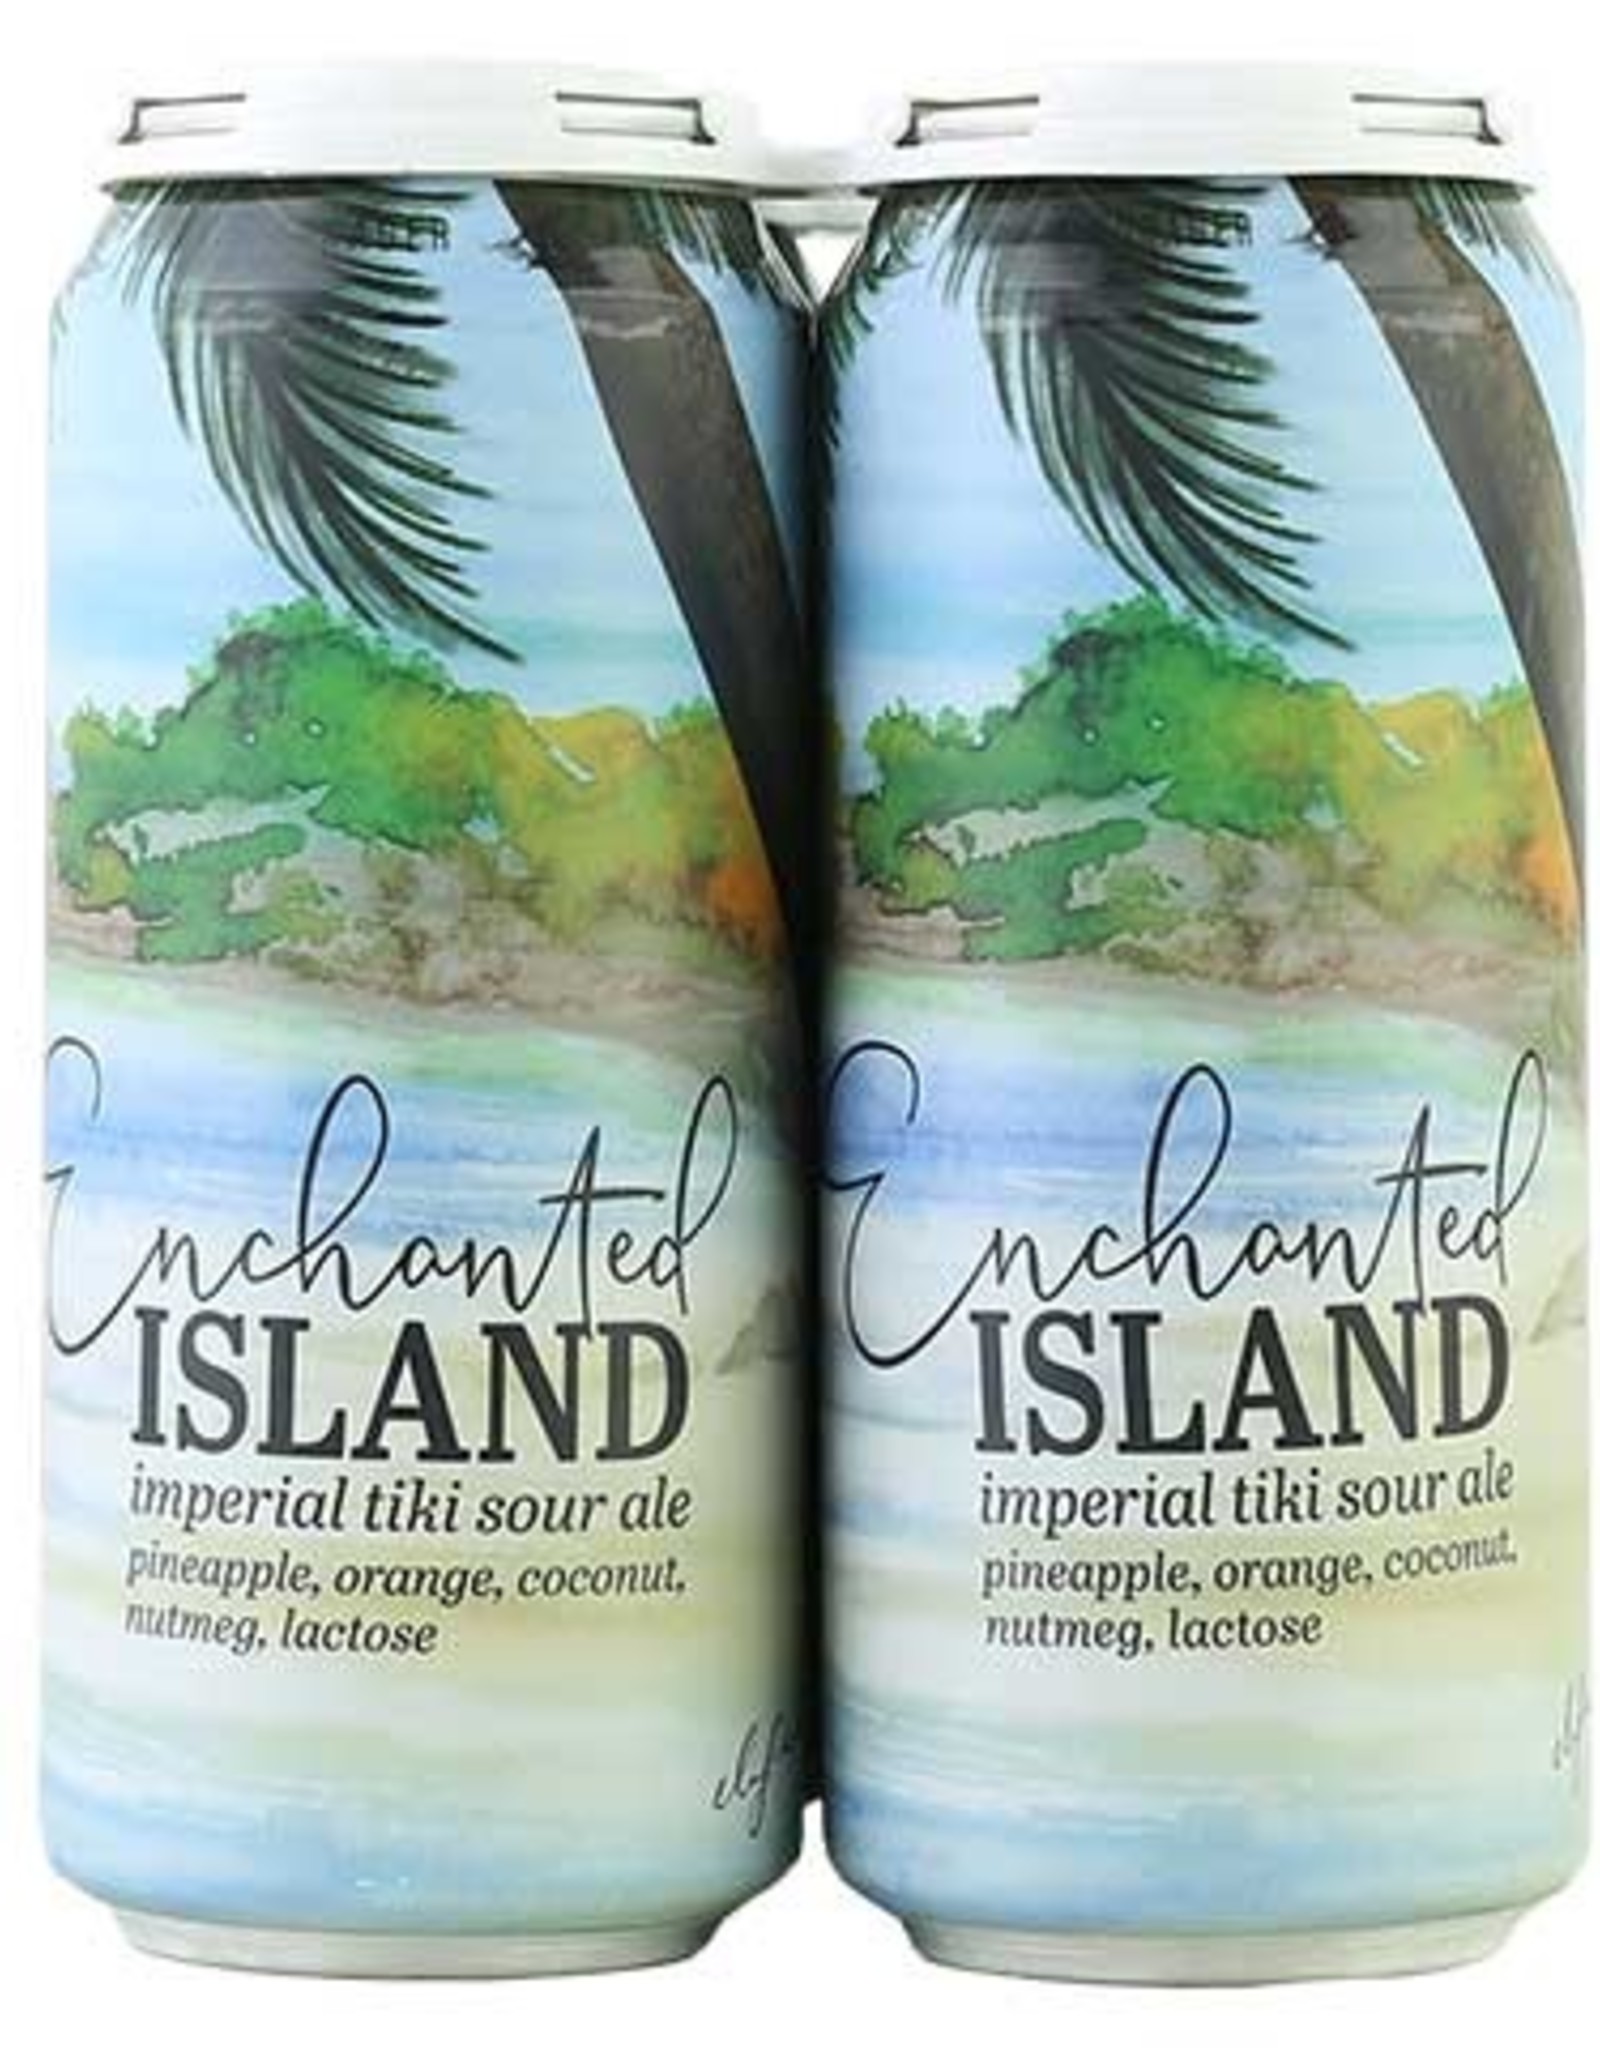 Humble Forager Enchanted Island 4x16 oz cans